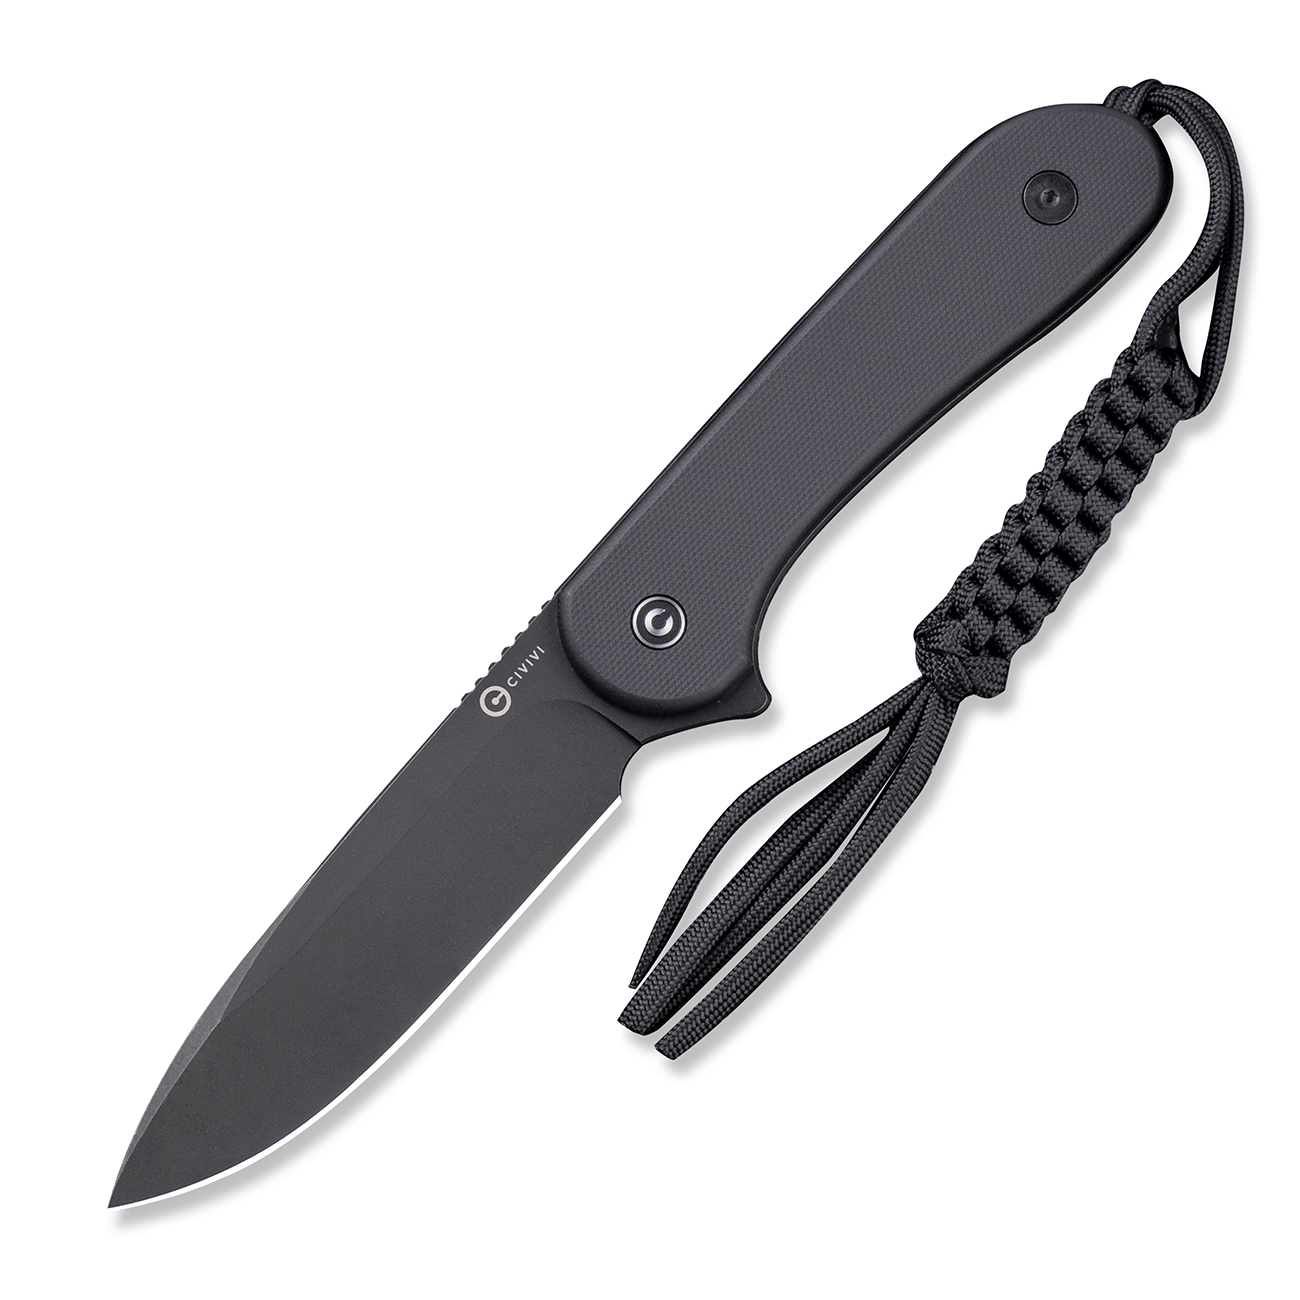 CIVIVI Elementum Fixed Blade C2105A Knife D2 Stainless Steel & Black G10 Hunting Knives